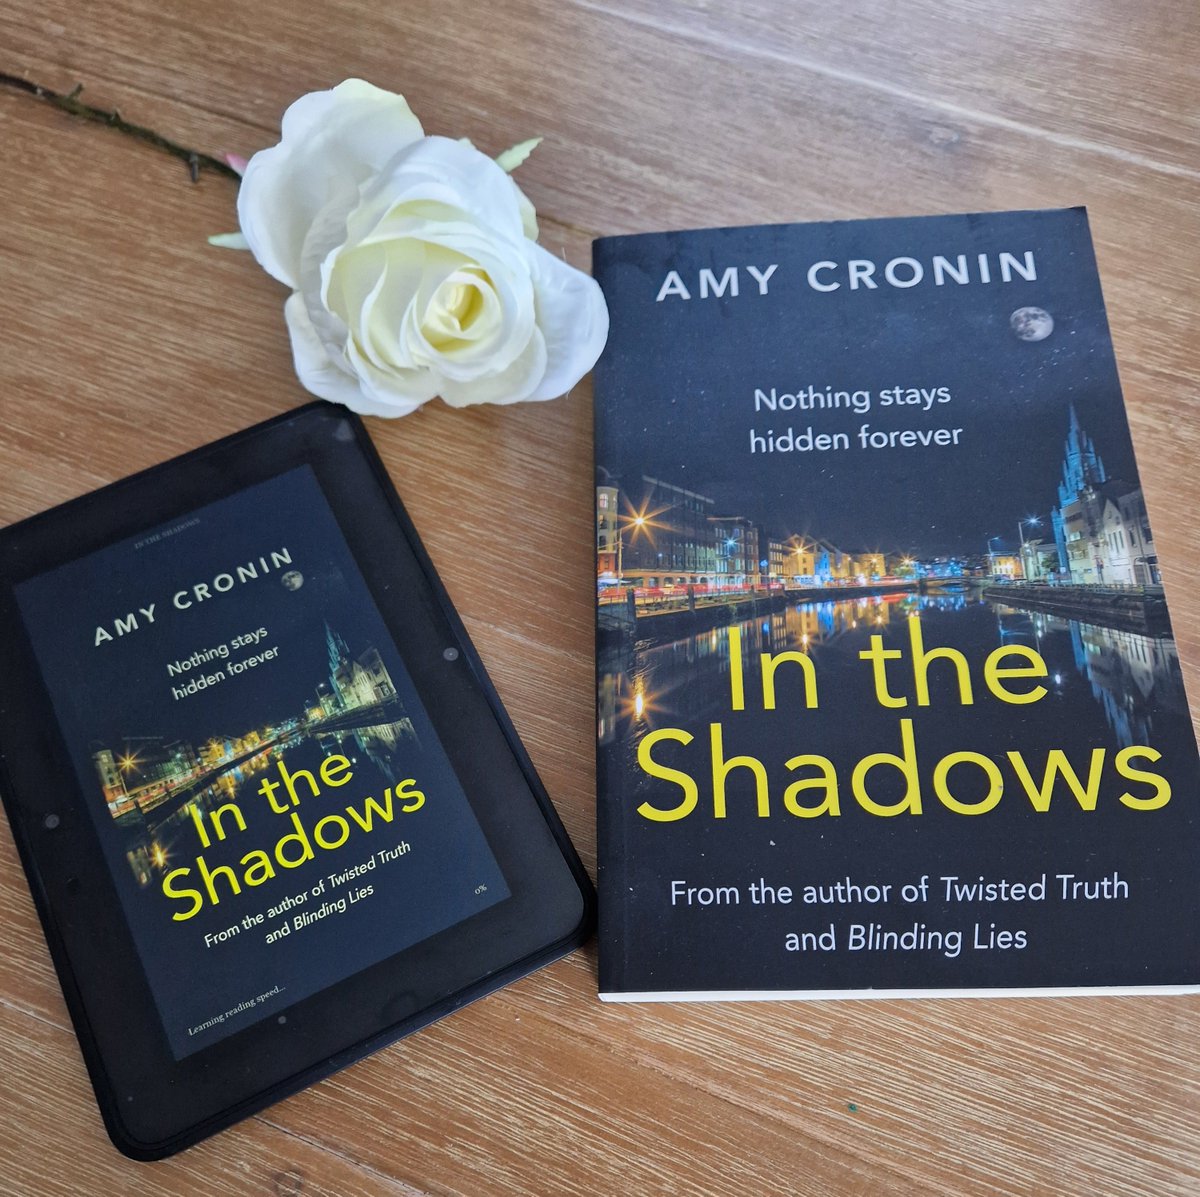 My pre-order just landed 🎊 (And my signed copy!) Well done @AmyCroninAuthor 💕 Another outstanding (slightly terrifying) read 👀🫣👌 #InTheShadows #thriller #newbook #crimeficti